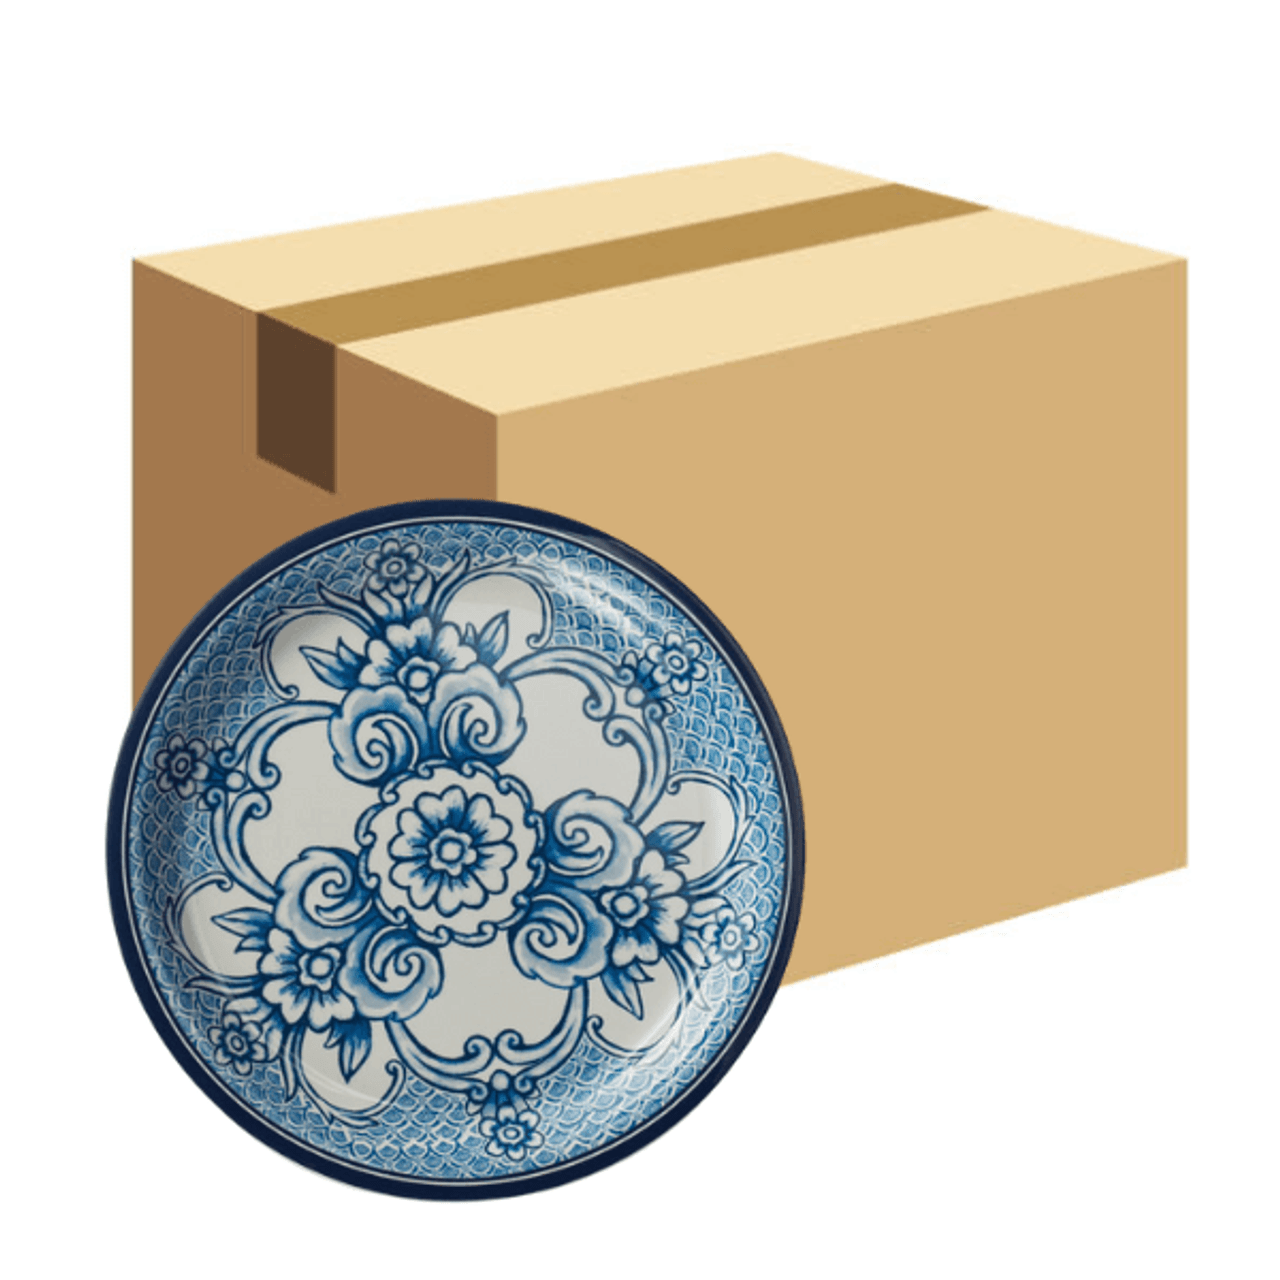 American Metalcraft BLUP6 Isabella 6 1/2" Round Blue / White Floral Melamine Bread and Butter Plate - 16/Case. CHICKEN PIECES.